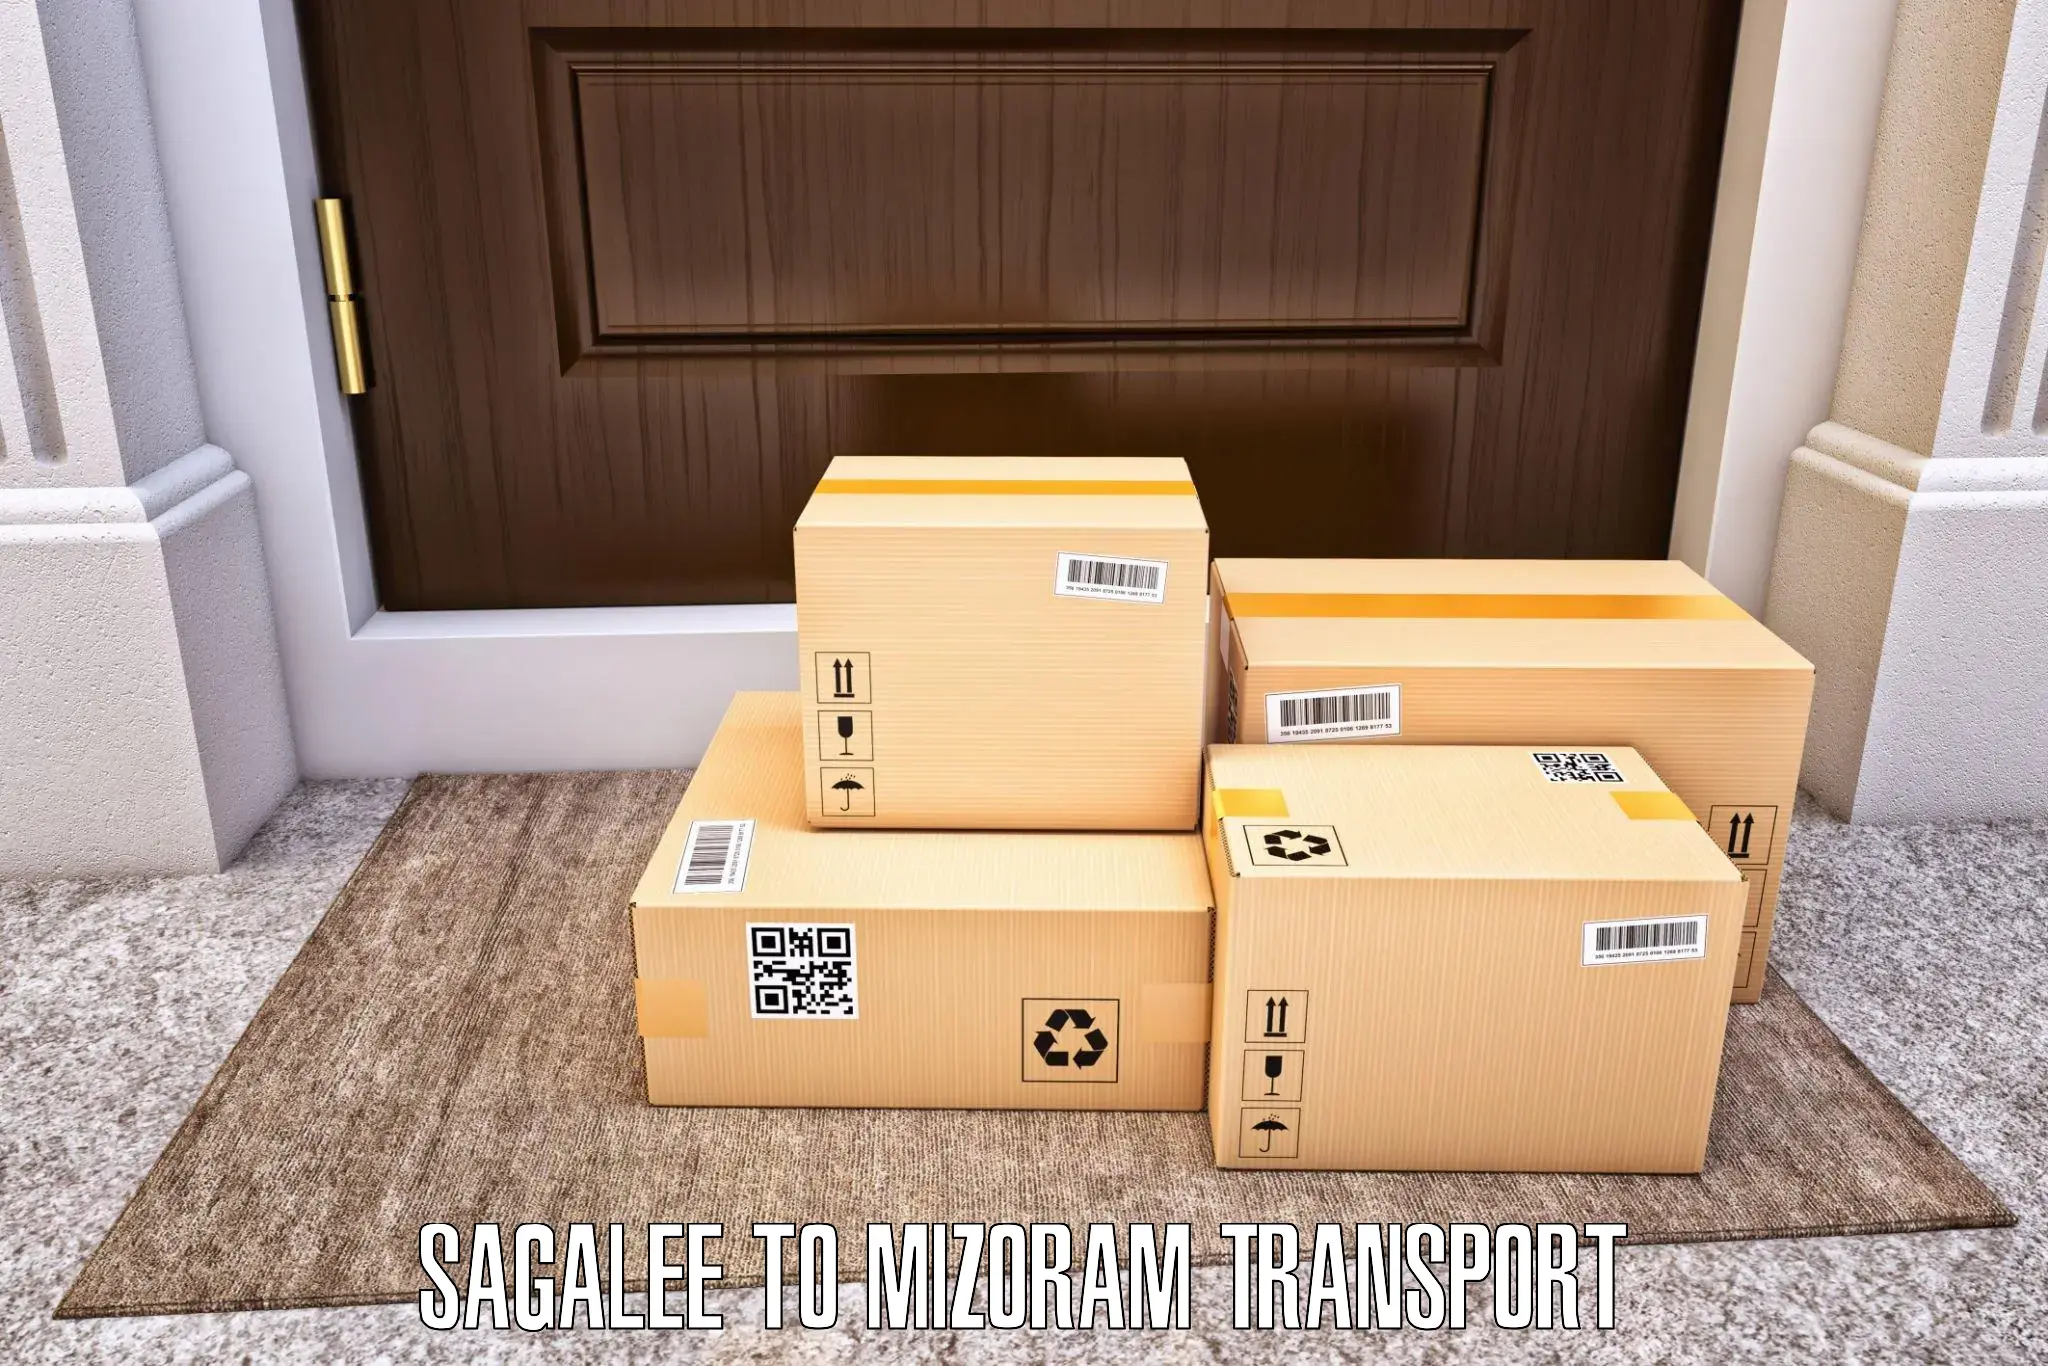 Air freight transport services in Sagalee to Mizoram